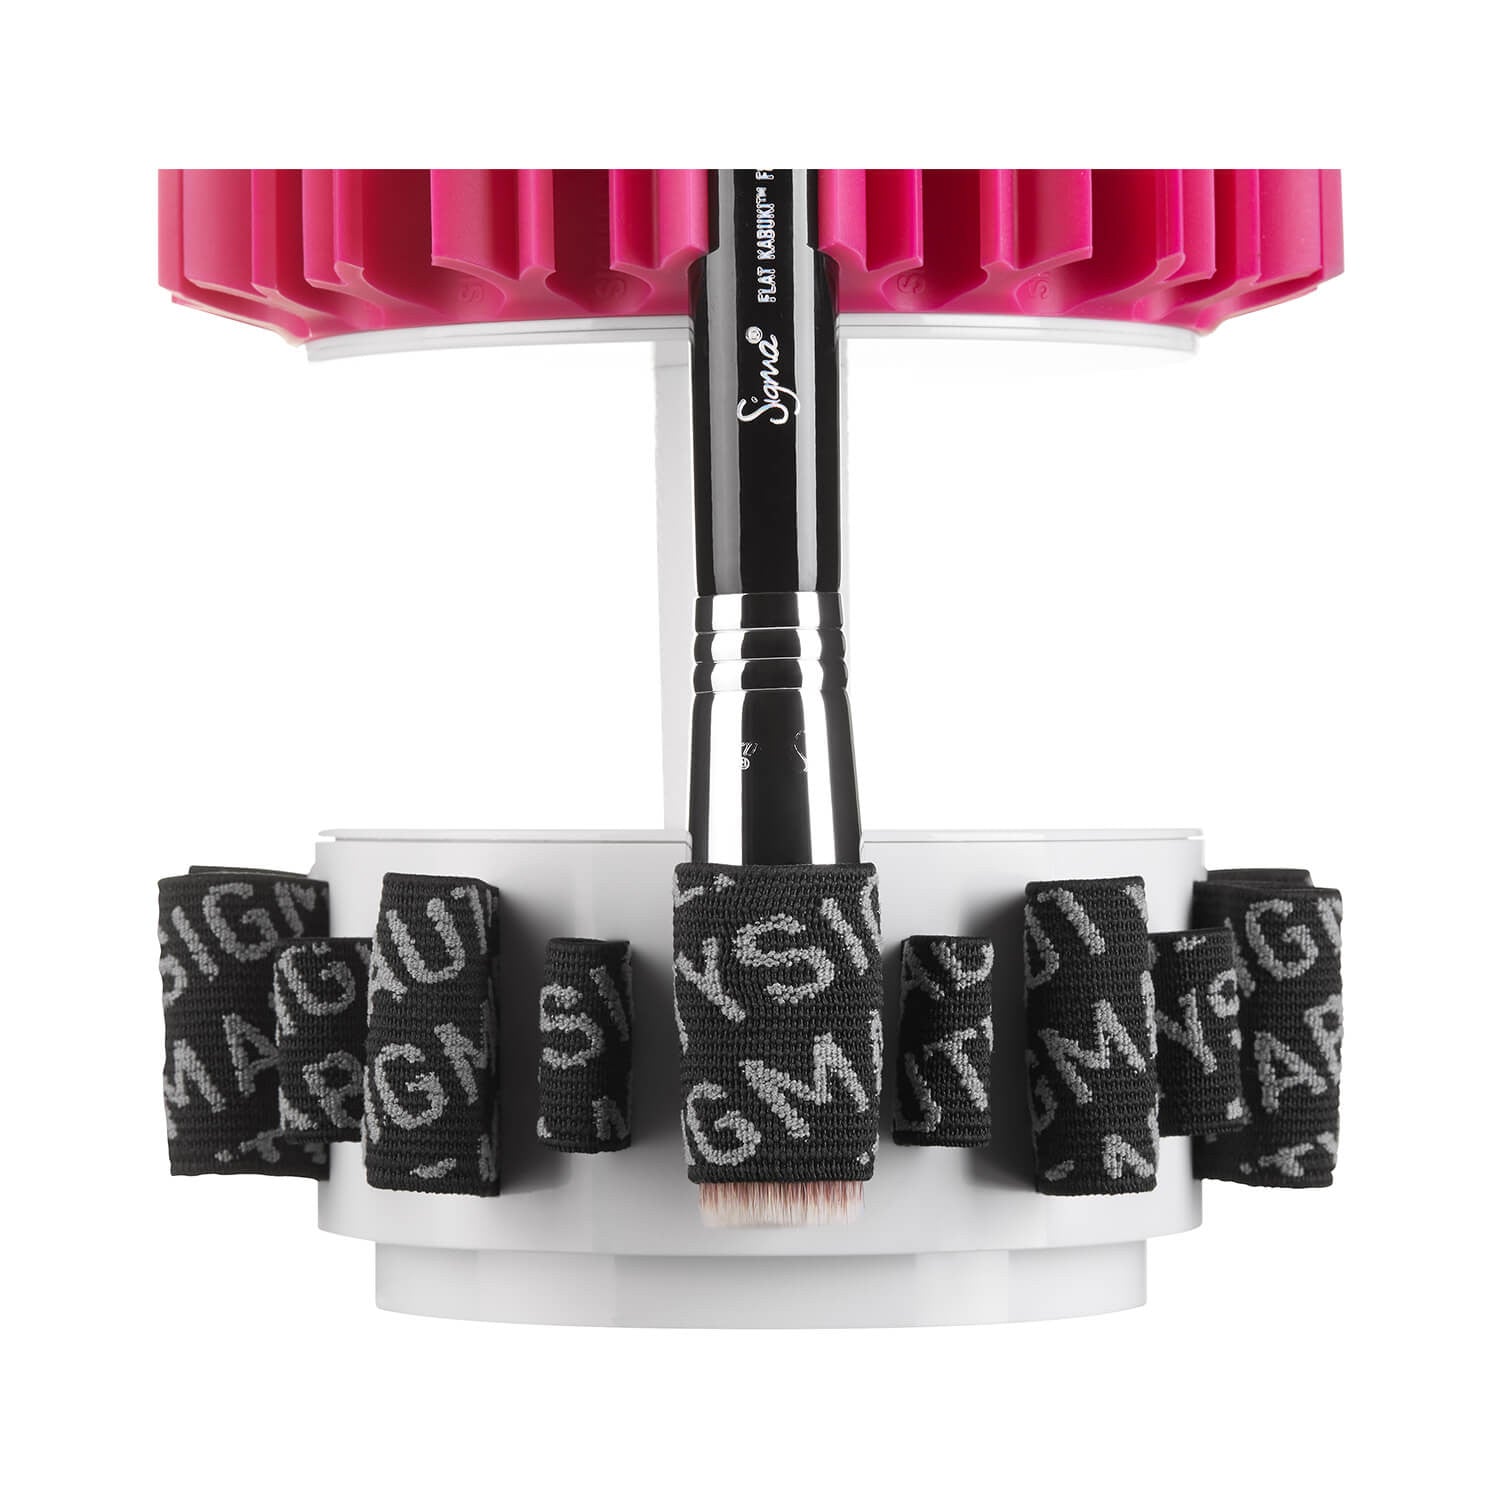 Sigma Beauty DRY'N SHAPE TOWER® EYES bands